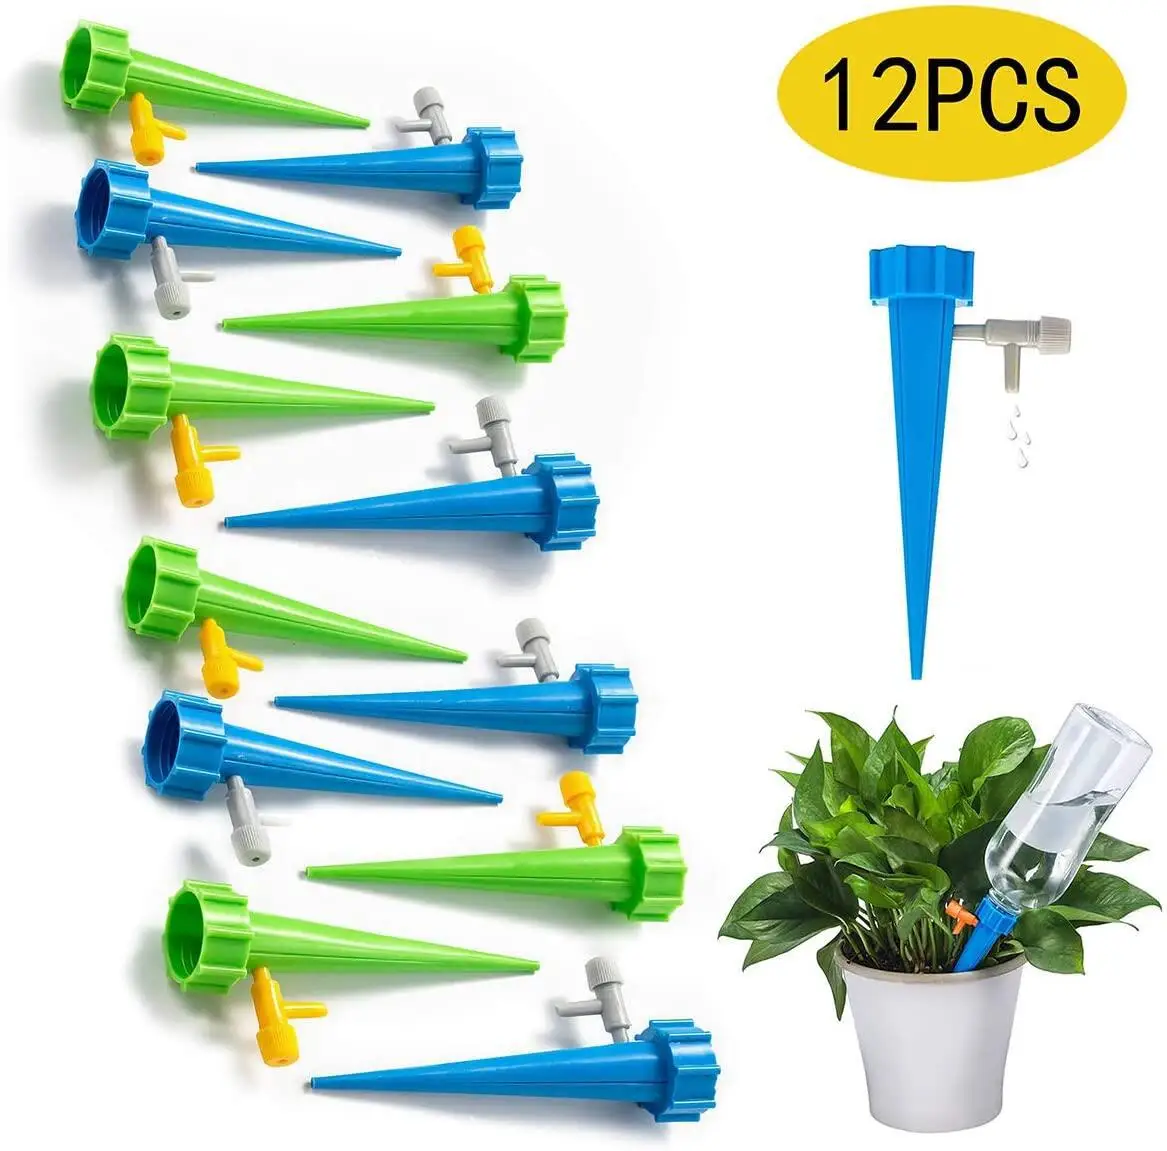 

12 Pack Set Plant Waterer Self Watering Spikes System Automatic Drip Irrigation Water Devices with Slow Release Control Valve, Green/blue